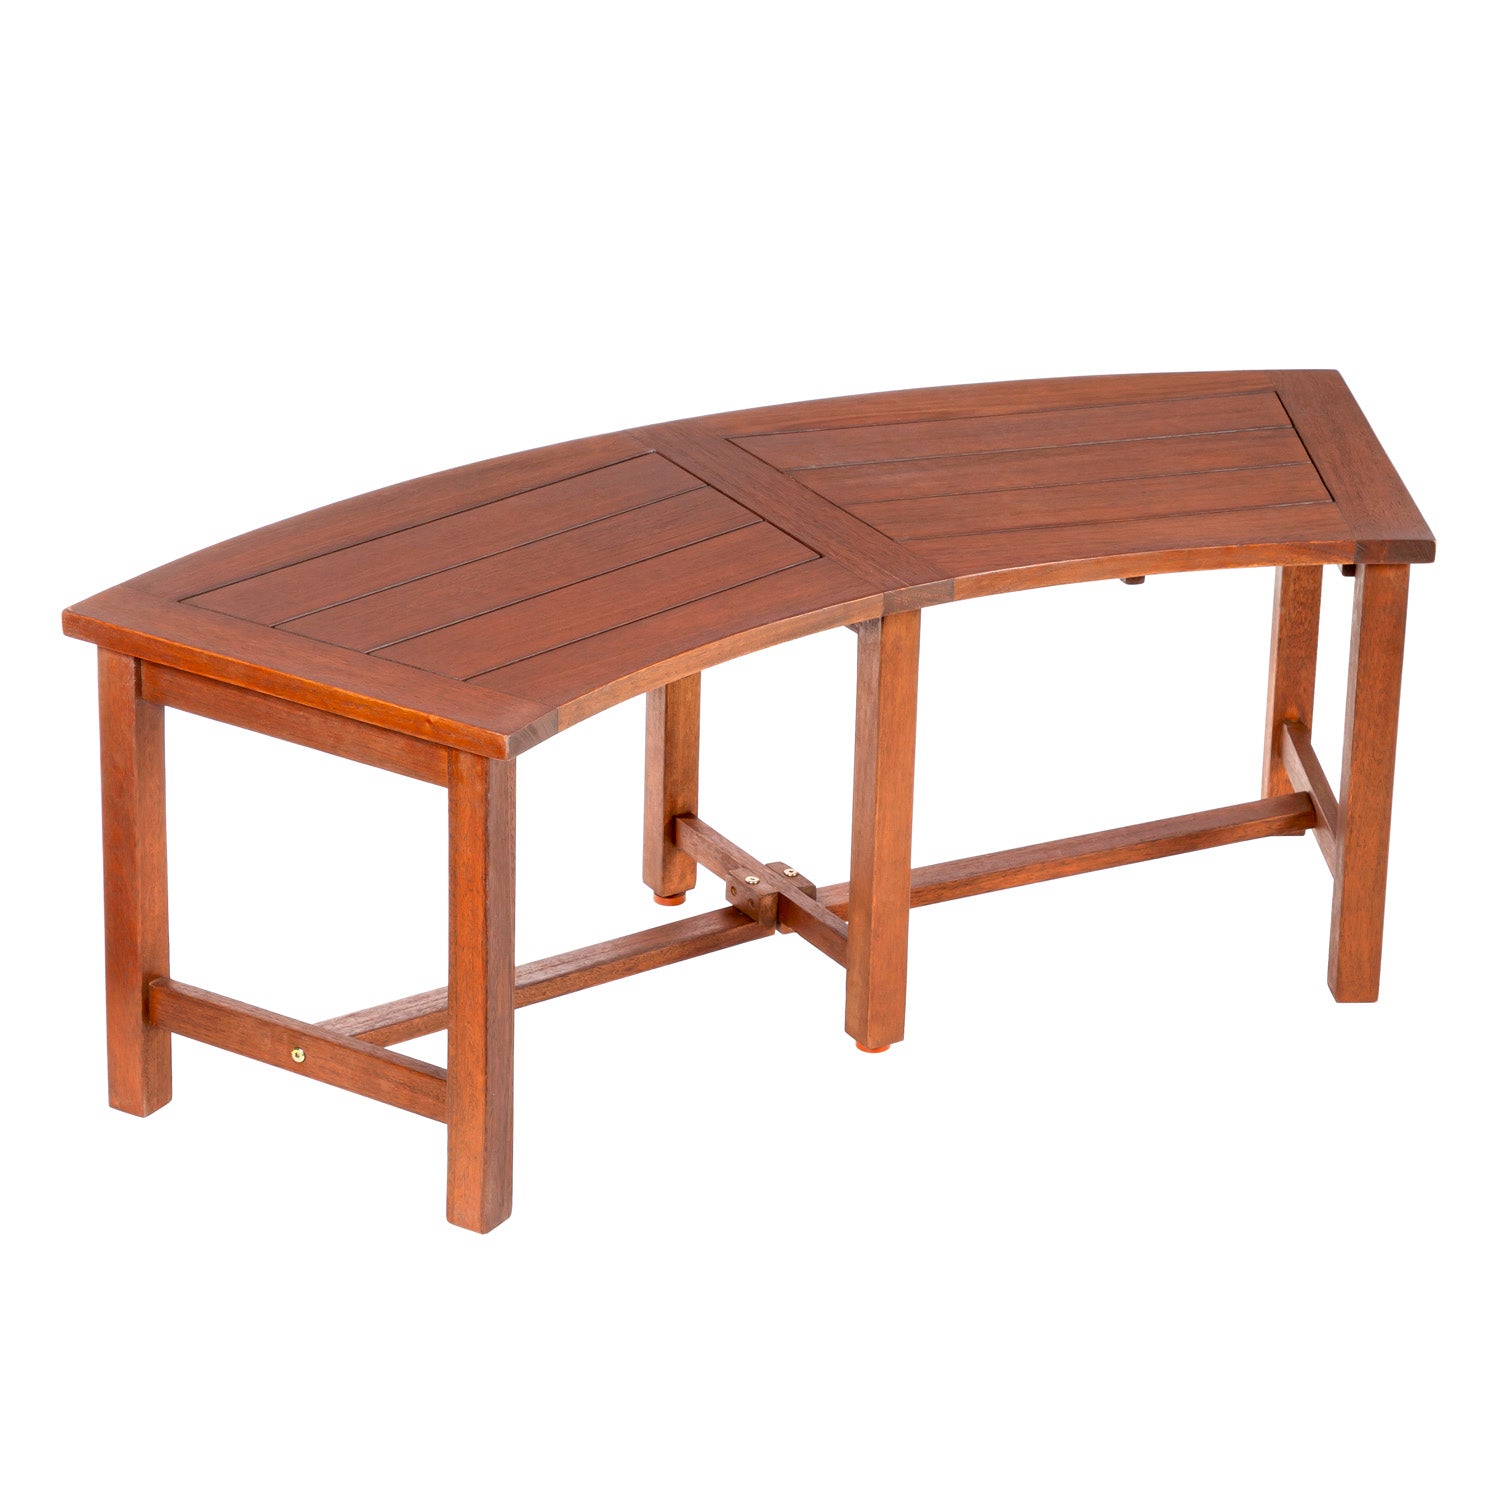 Plow & Hearth Curved Eucalyptus Bench